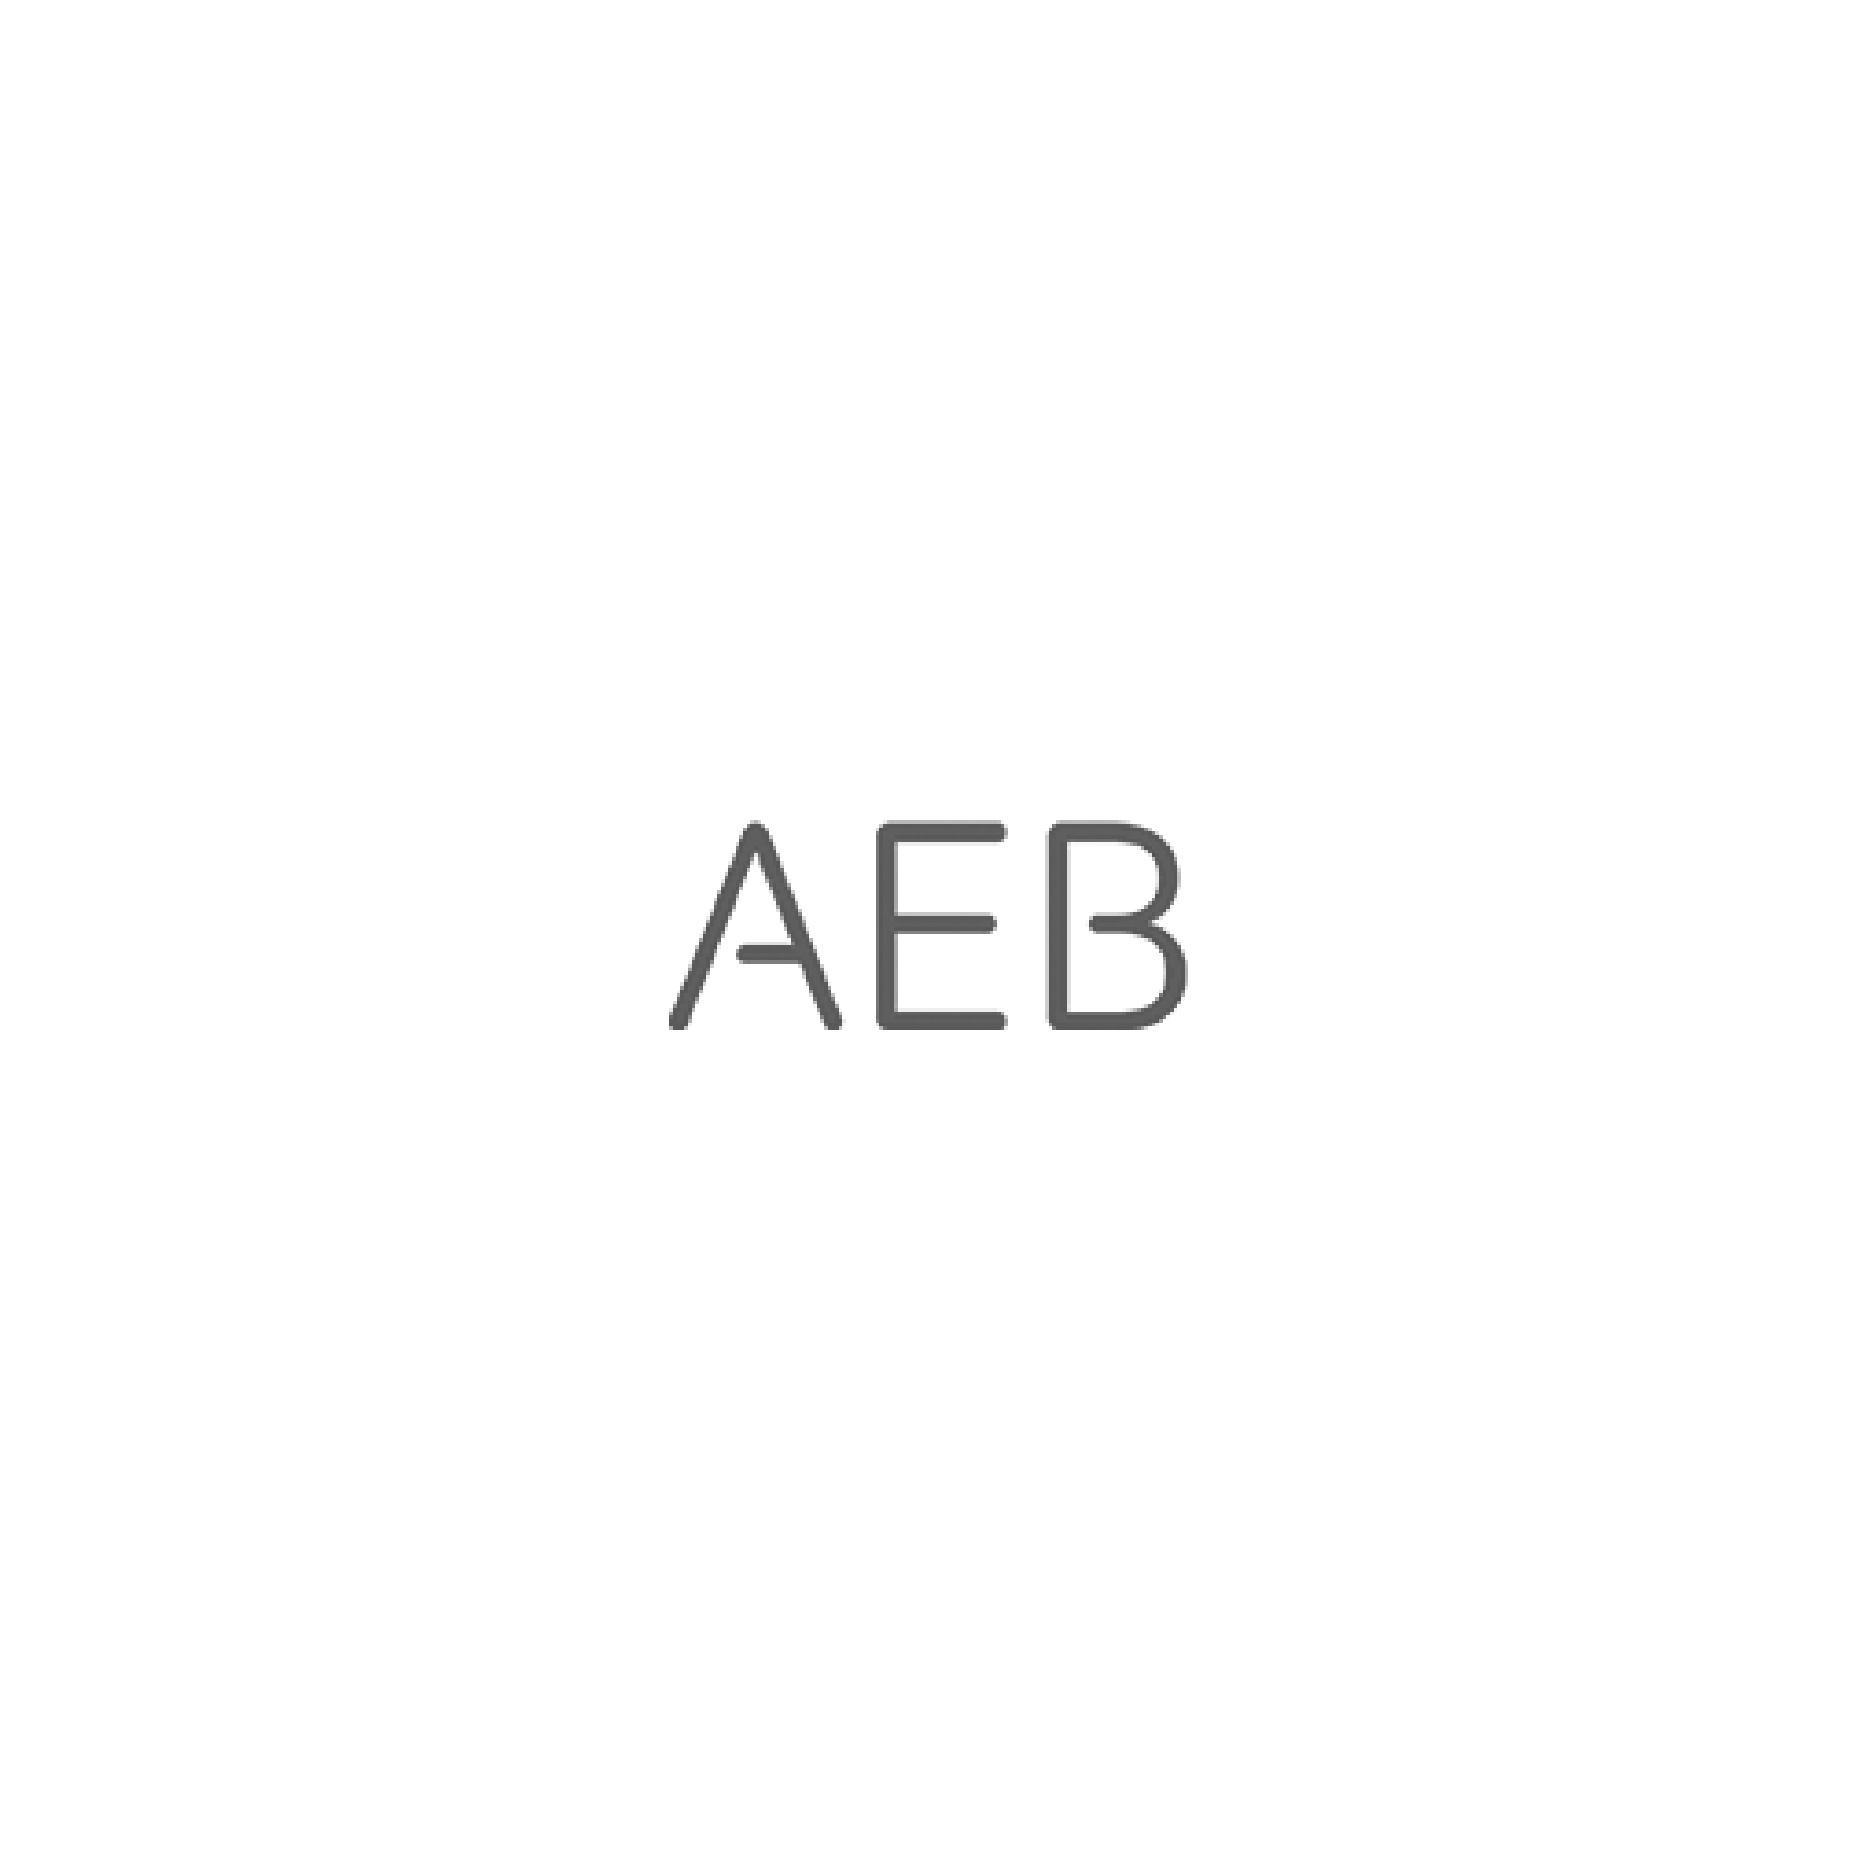 aeb-01.png